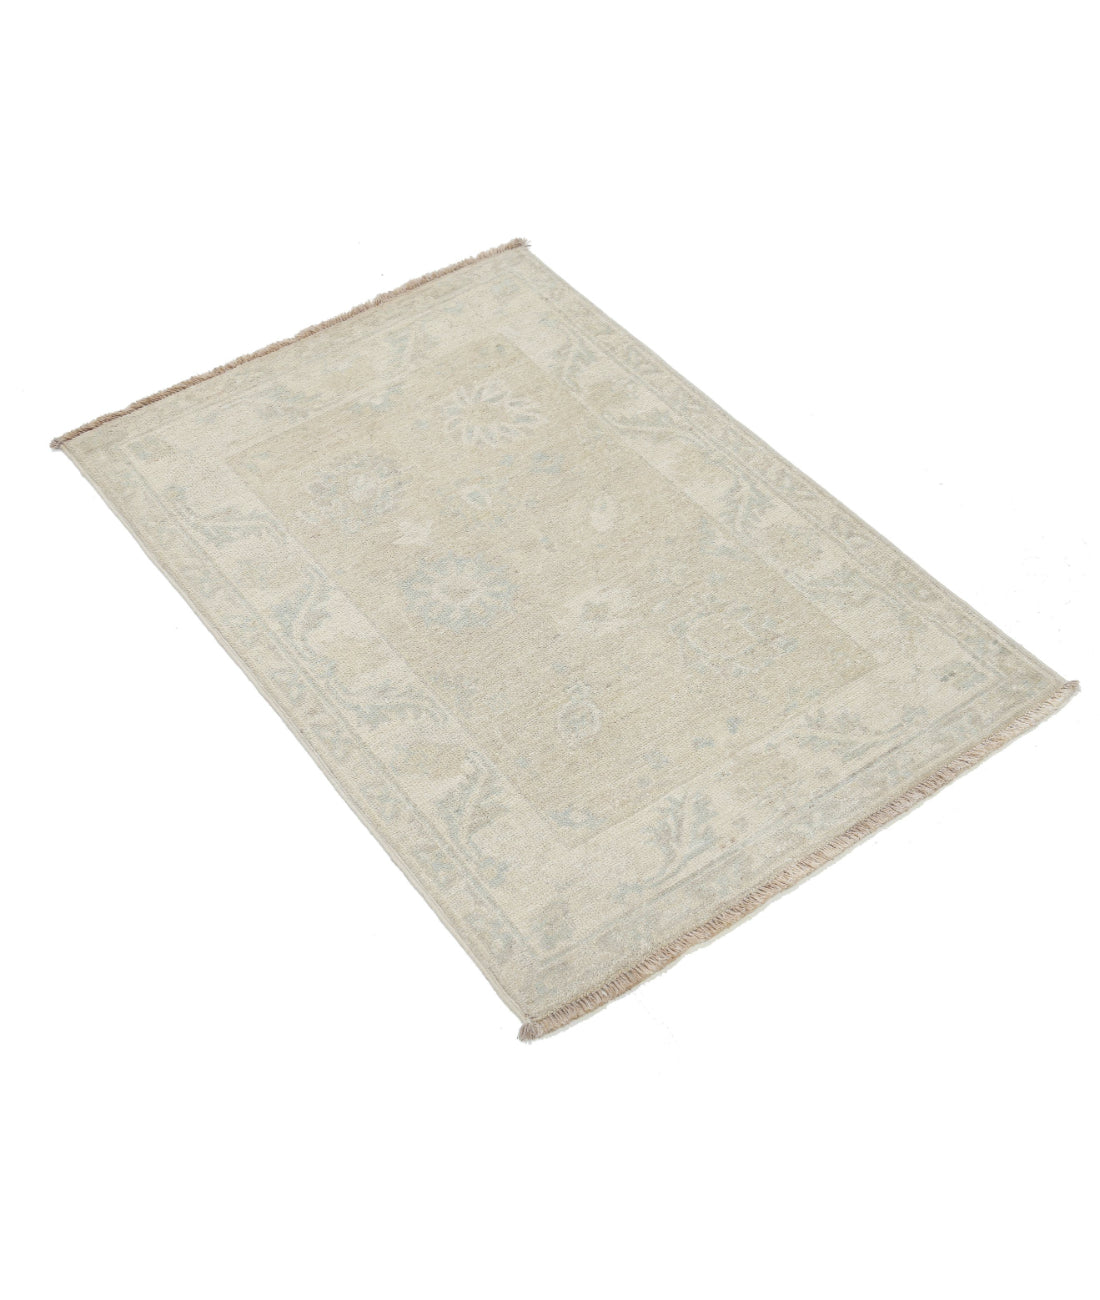 Hand Knotted Serenity Wool Rug - 2'1'' x 3'0'' 2'1'' x 3'0'' (63 X 90) / Taupe / Ivory